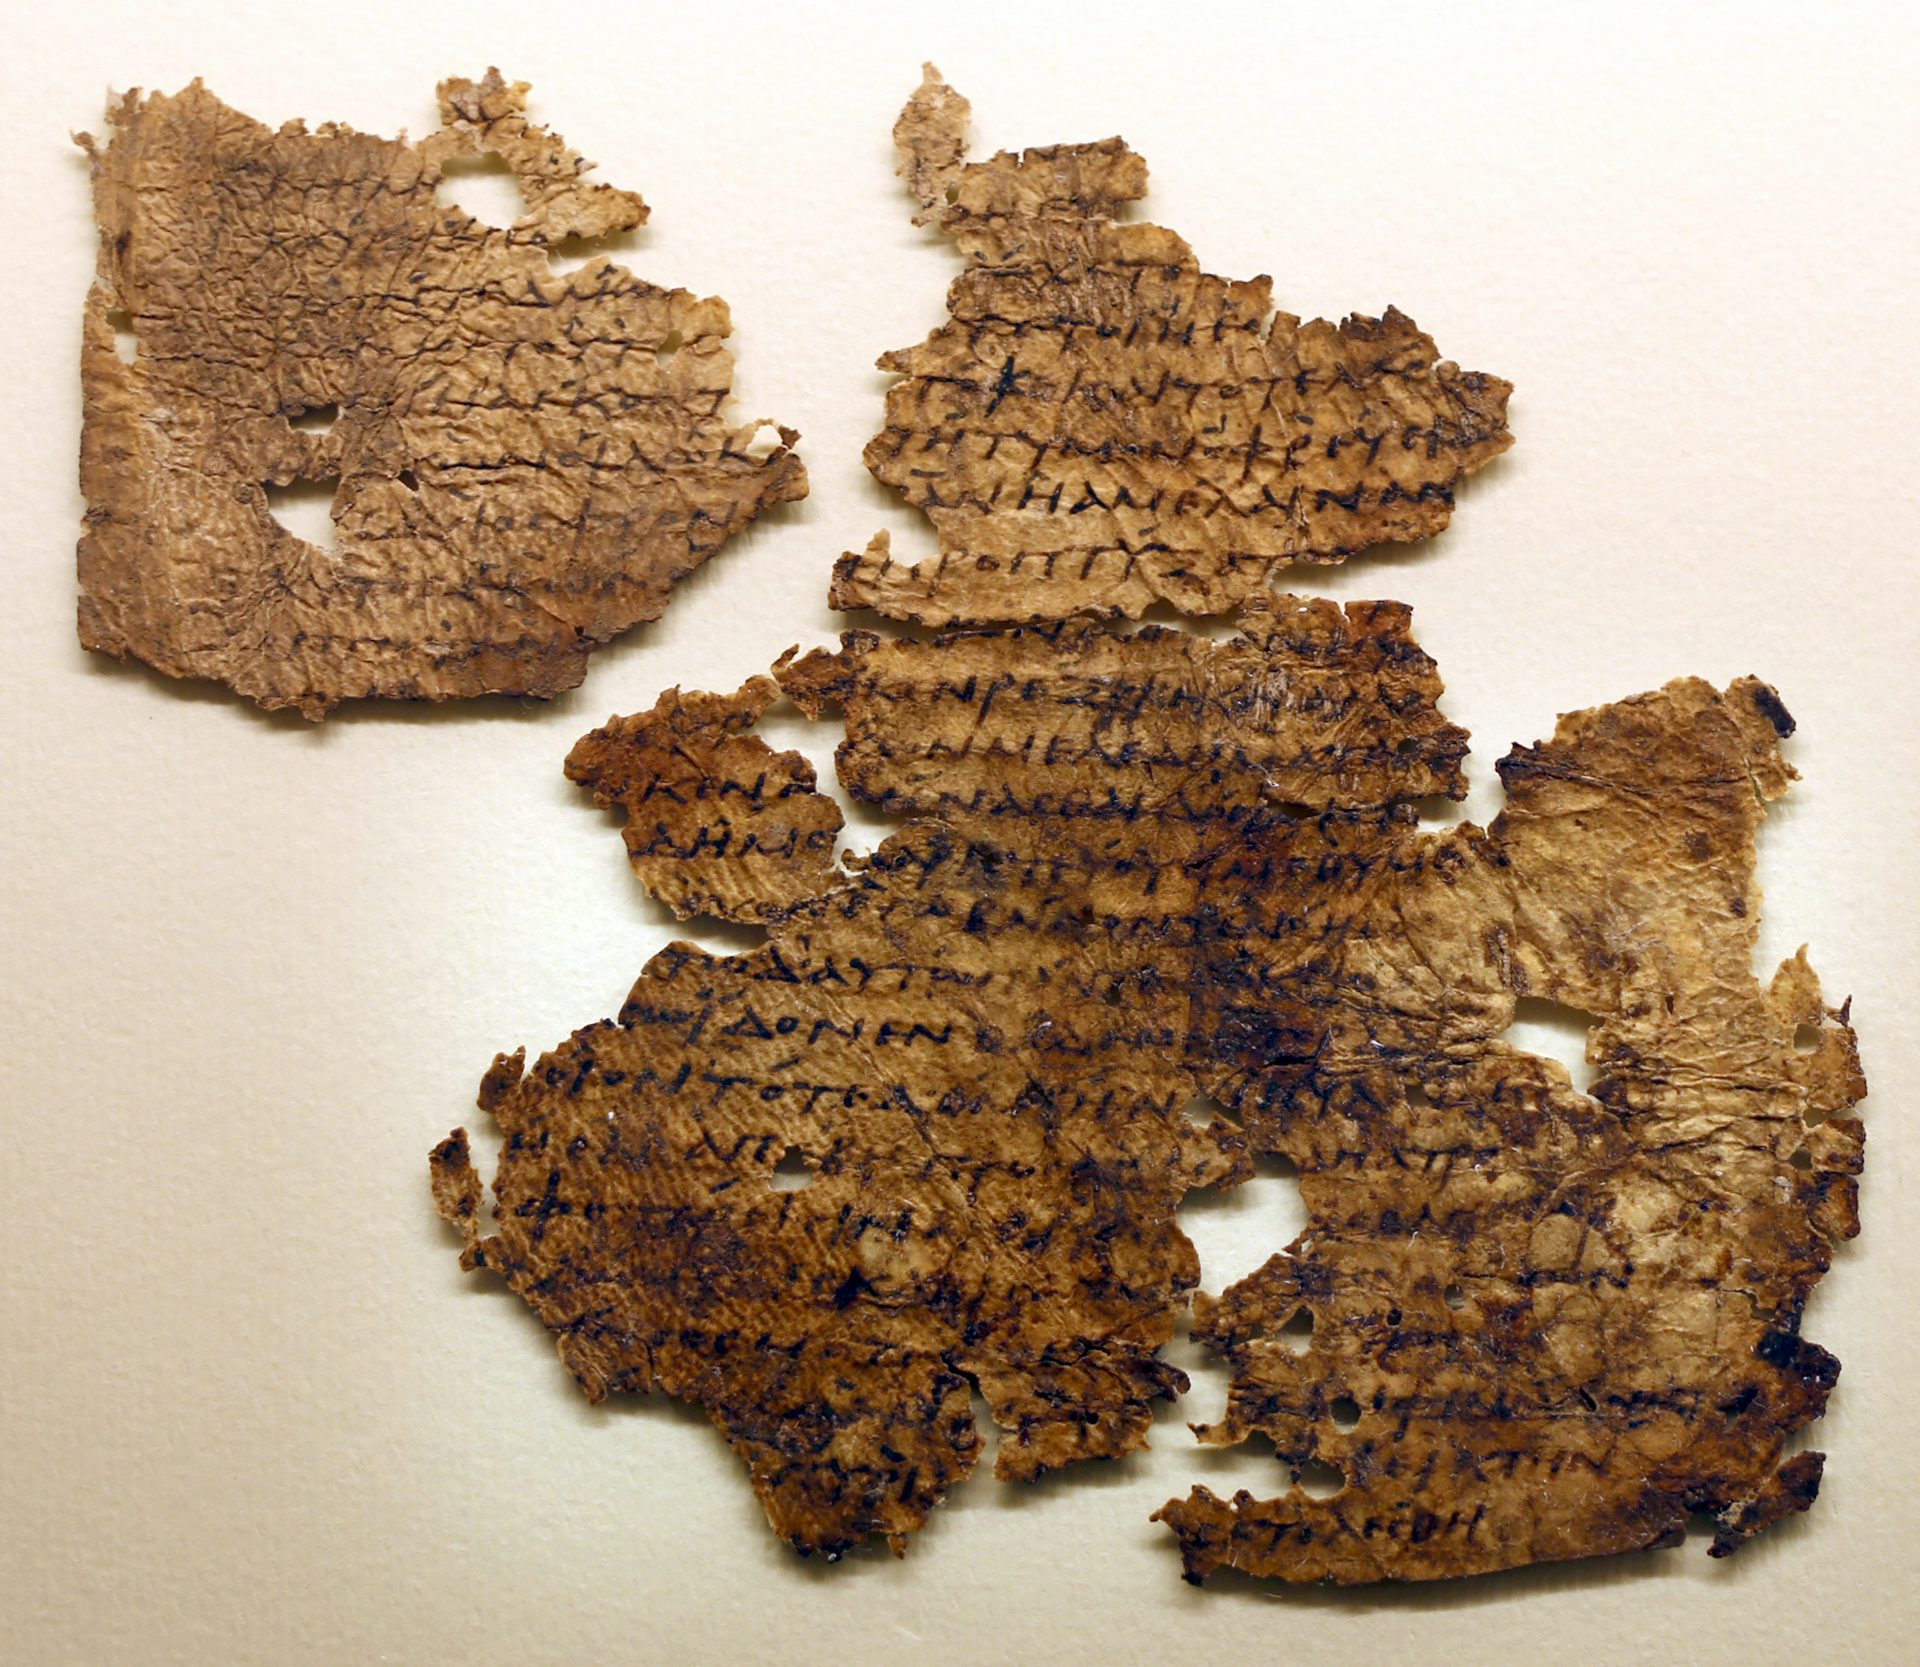 Papyrus fragment of Homer's Odyssey